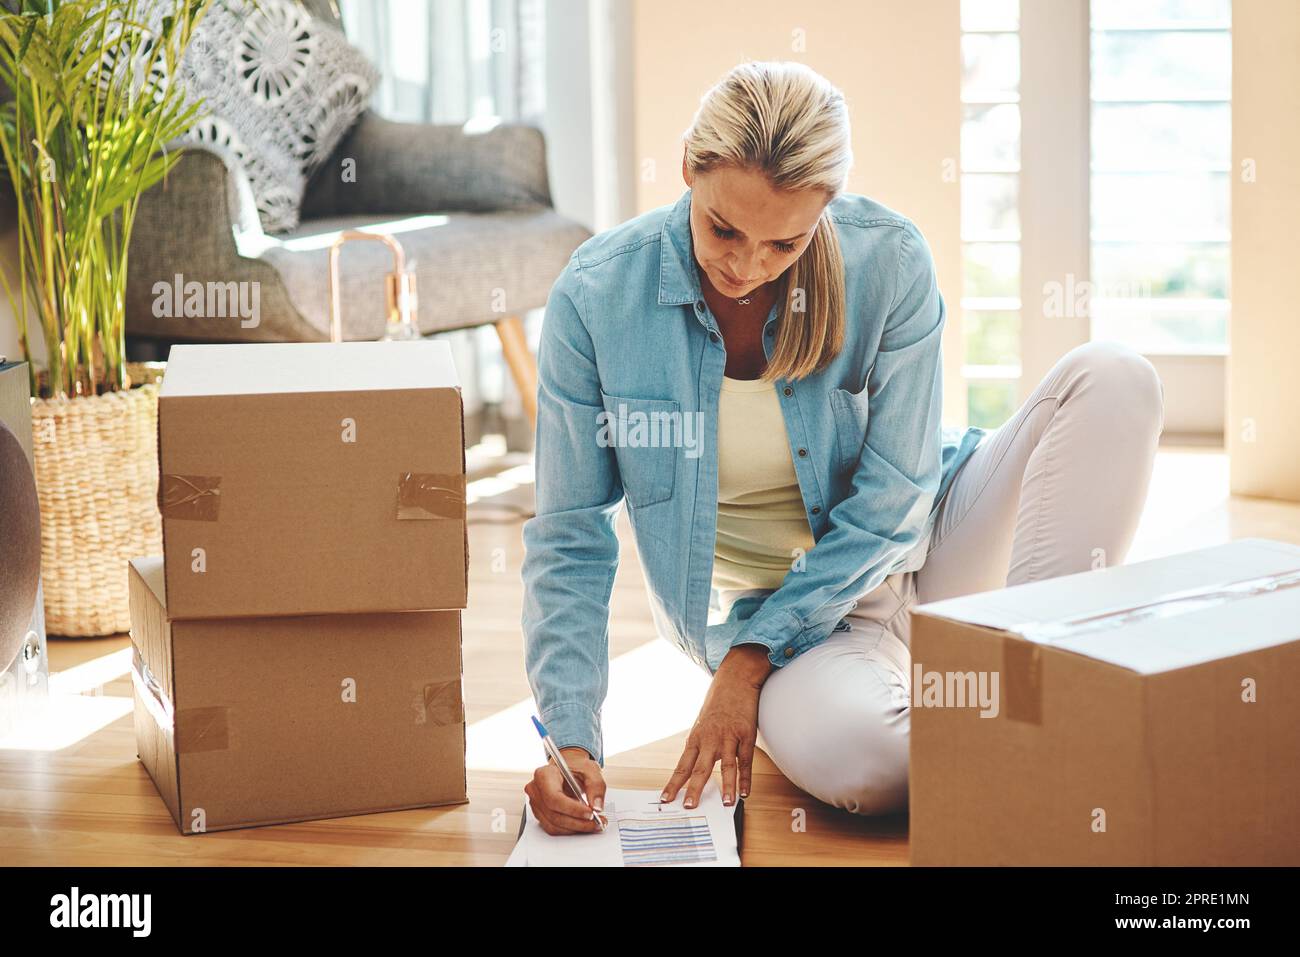 Keeping record of all her belongings. a mature woman going through paperwork on moving day. Stock Photo